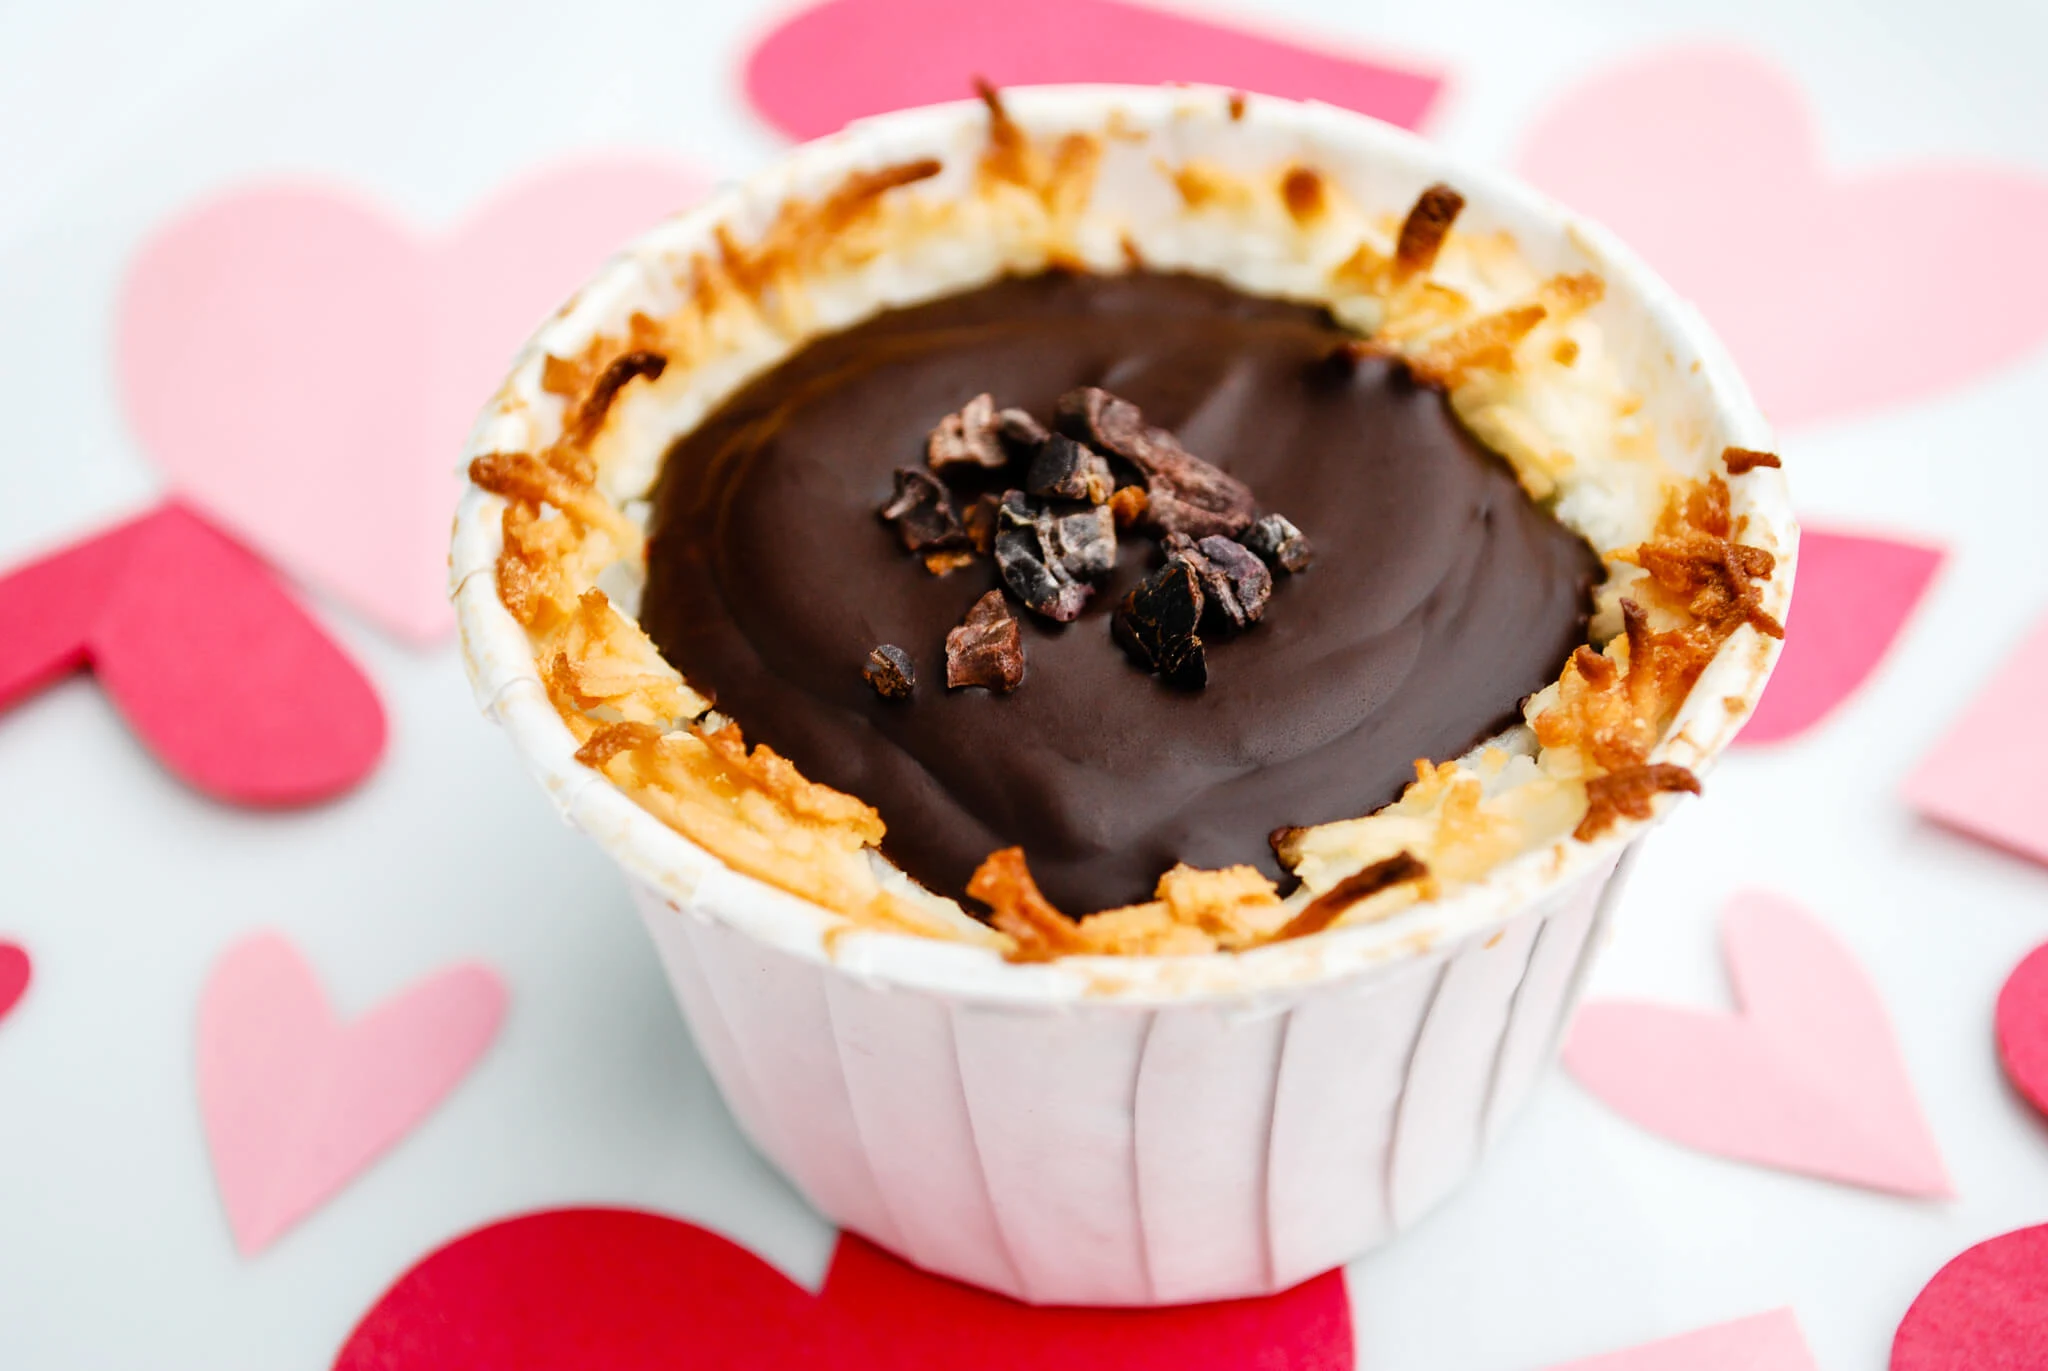 Toasted coconut chocolate Valentine's Day dessert with cacoa nibs